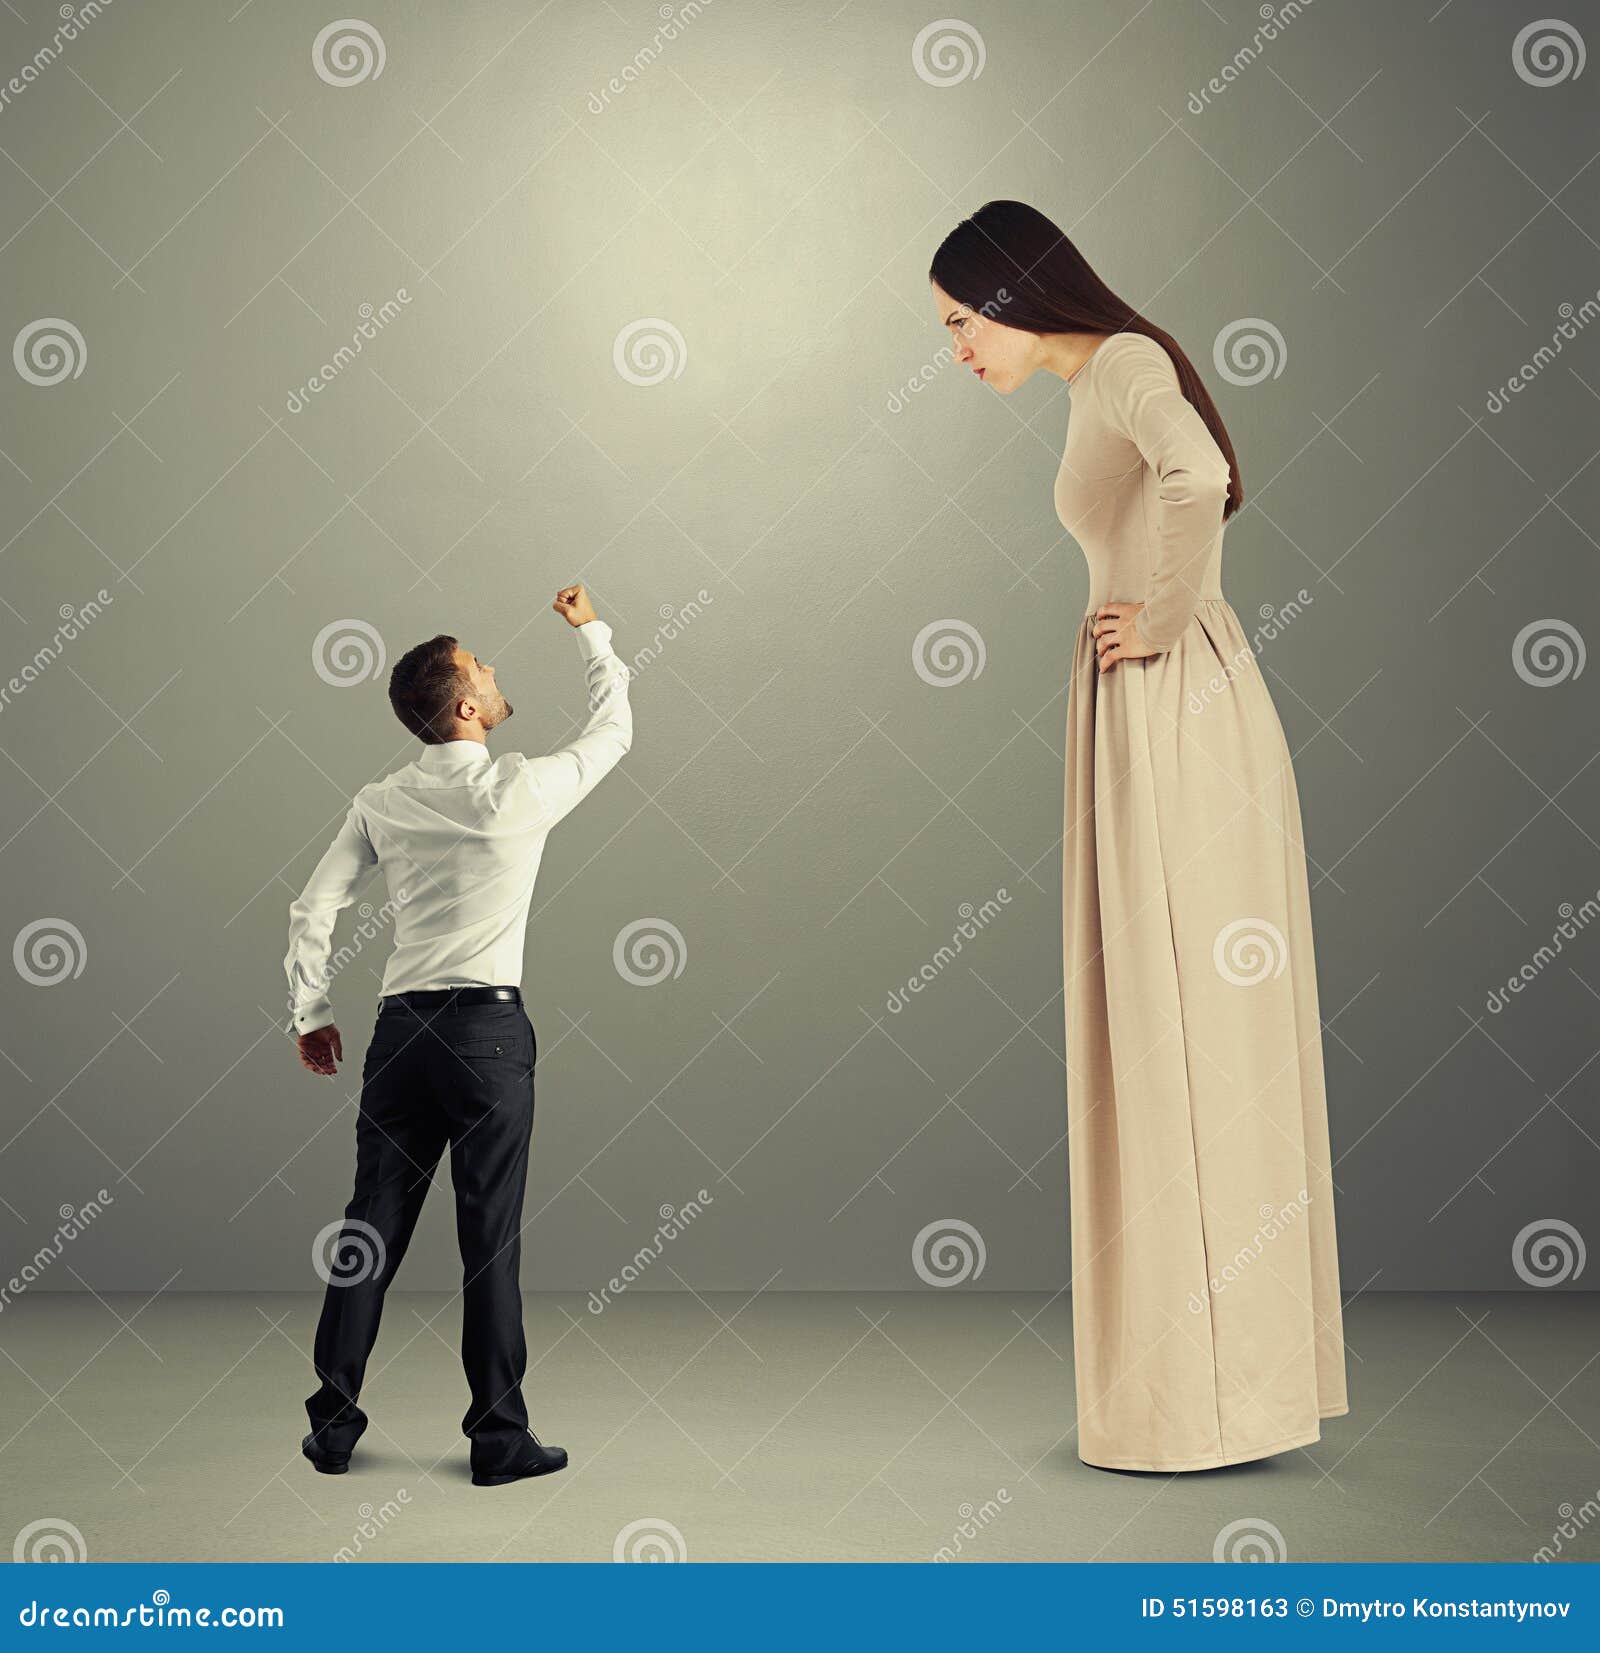 Man Showing Fist To Dissatisfied Woman Stoc